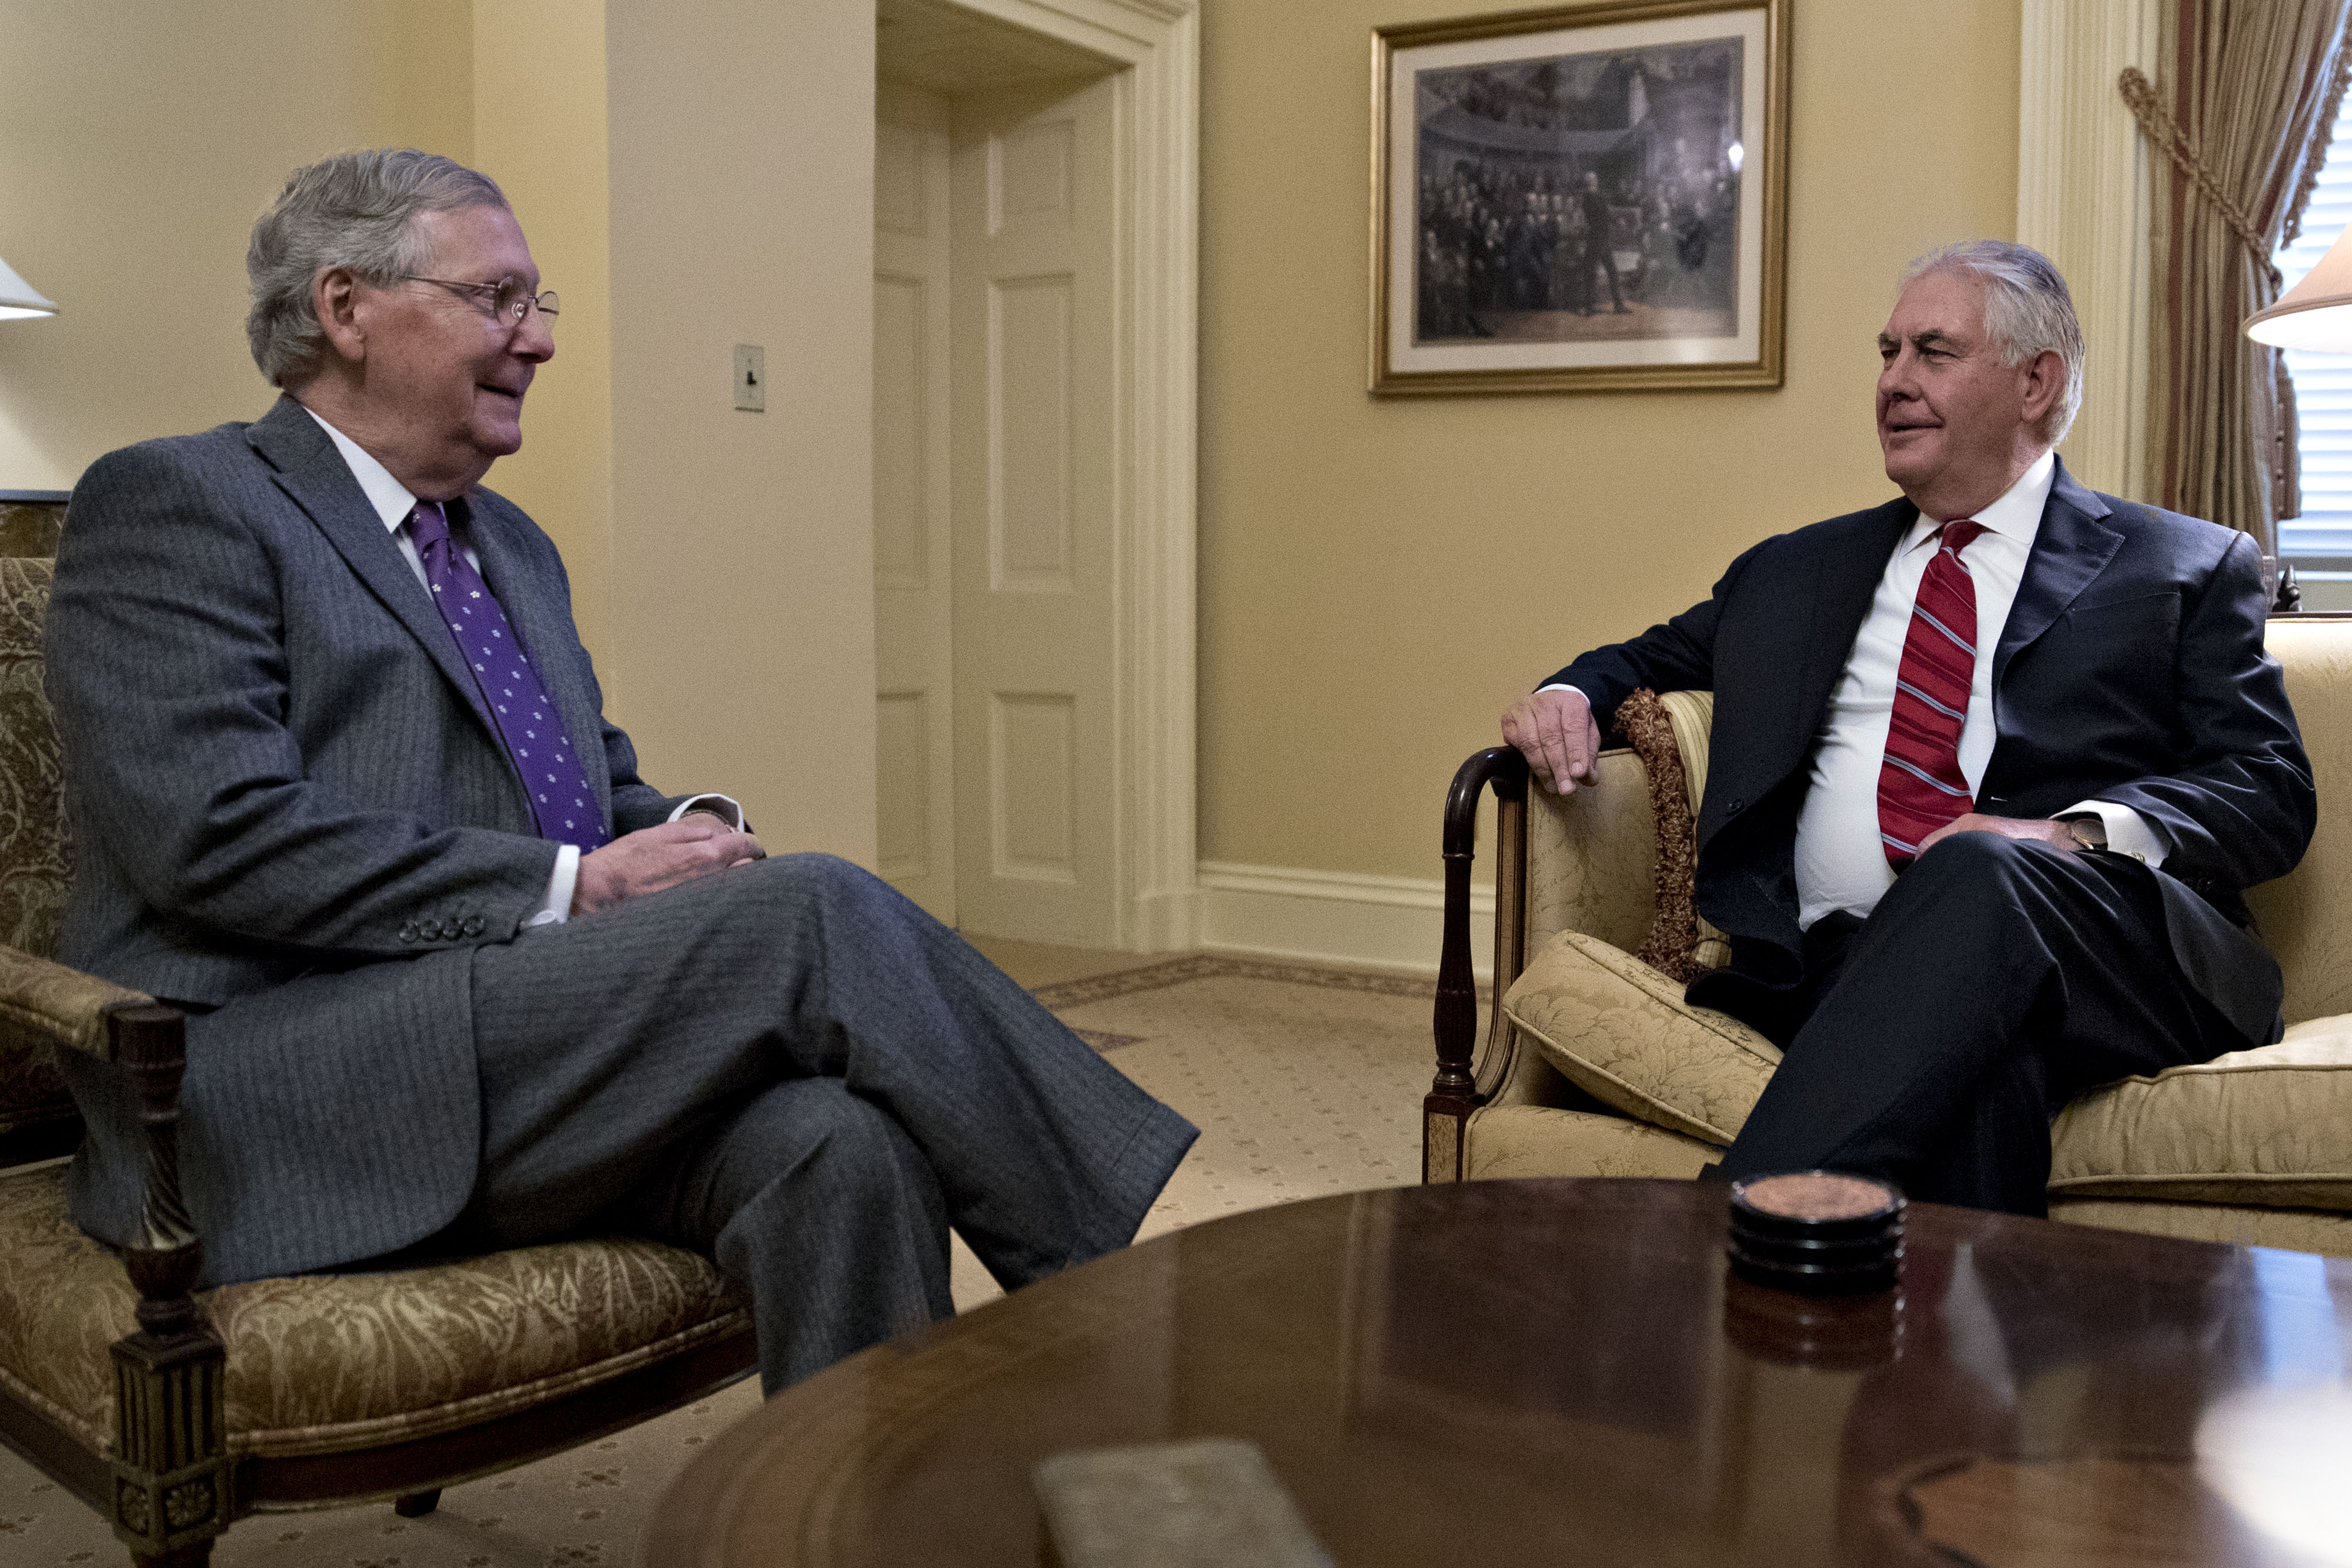 Rex Tillerson, former chief executive officer of Exxon Mobile Corp. and U.S. Secretary of State nominee for President-elect Donald Trump, right, talks to Senate Majority Leader Mitch McConnell, a Republican from Kentucky, during a meeting on Capitol Hill in Washington, D.C., on Jan. 4, 2017. (Andrew Harrer—Bloomberg/Getty Images)